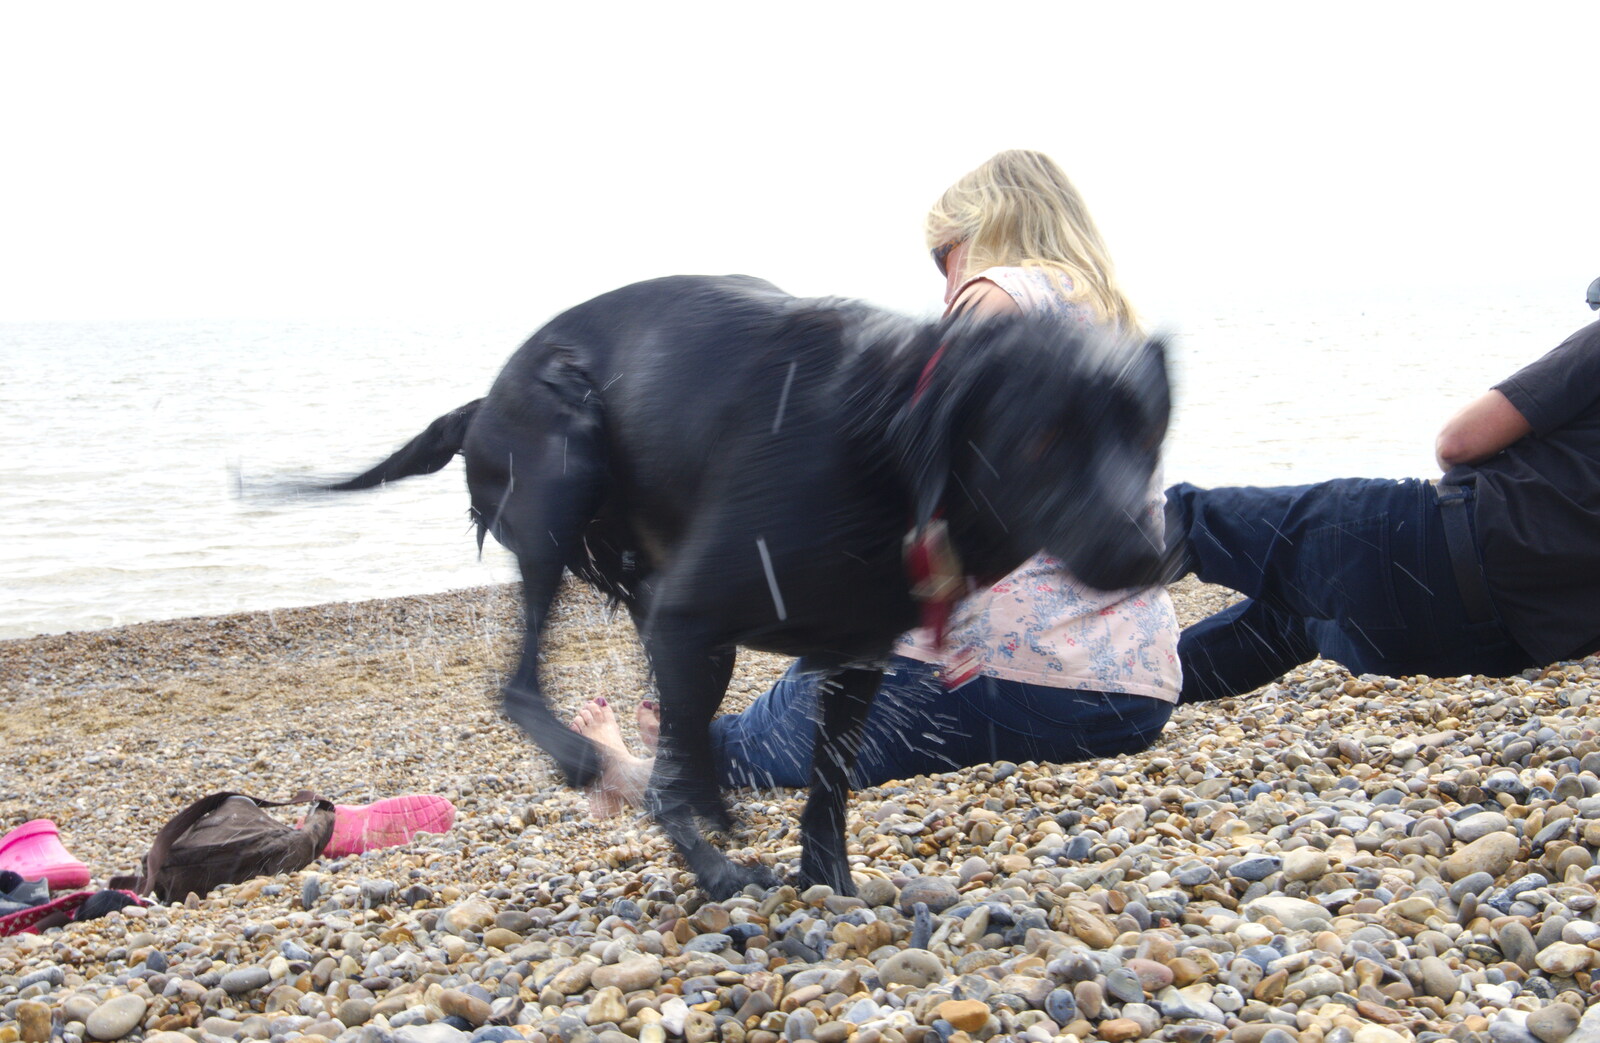 Tilly Dog has a shake from Cliff House Camping, Dunwich, Suffolk - 15th June 2019